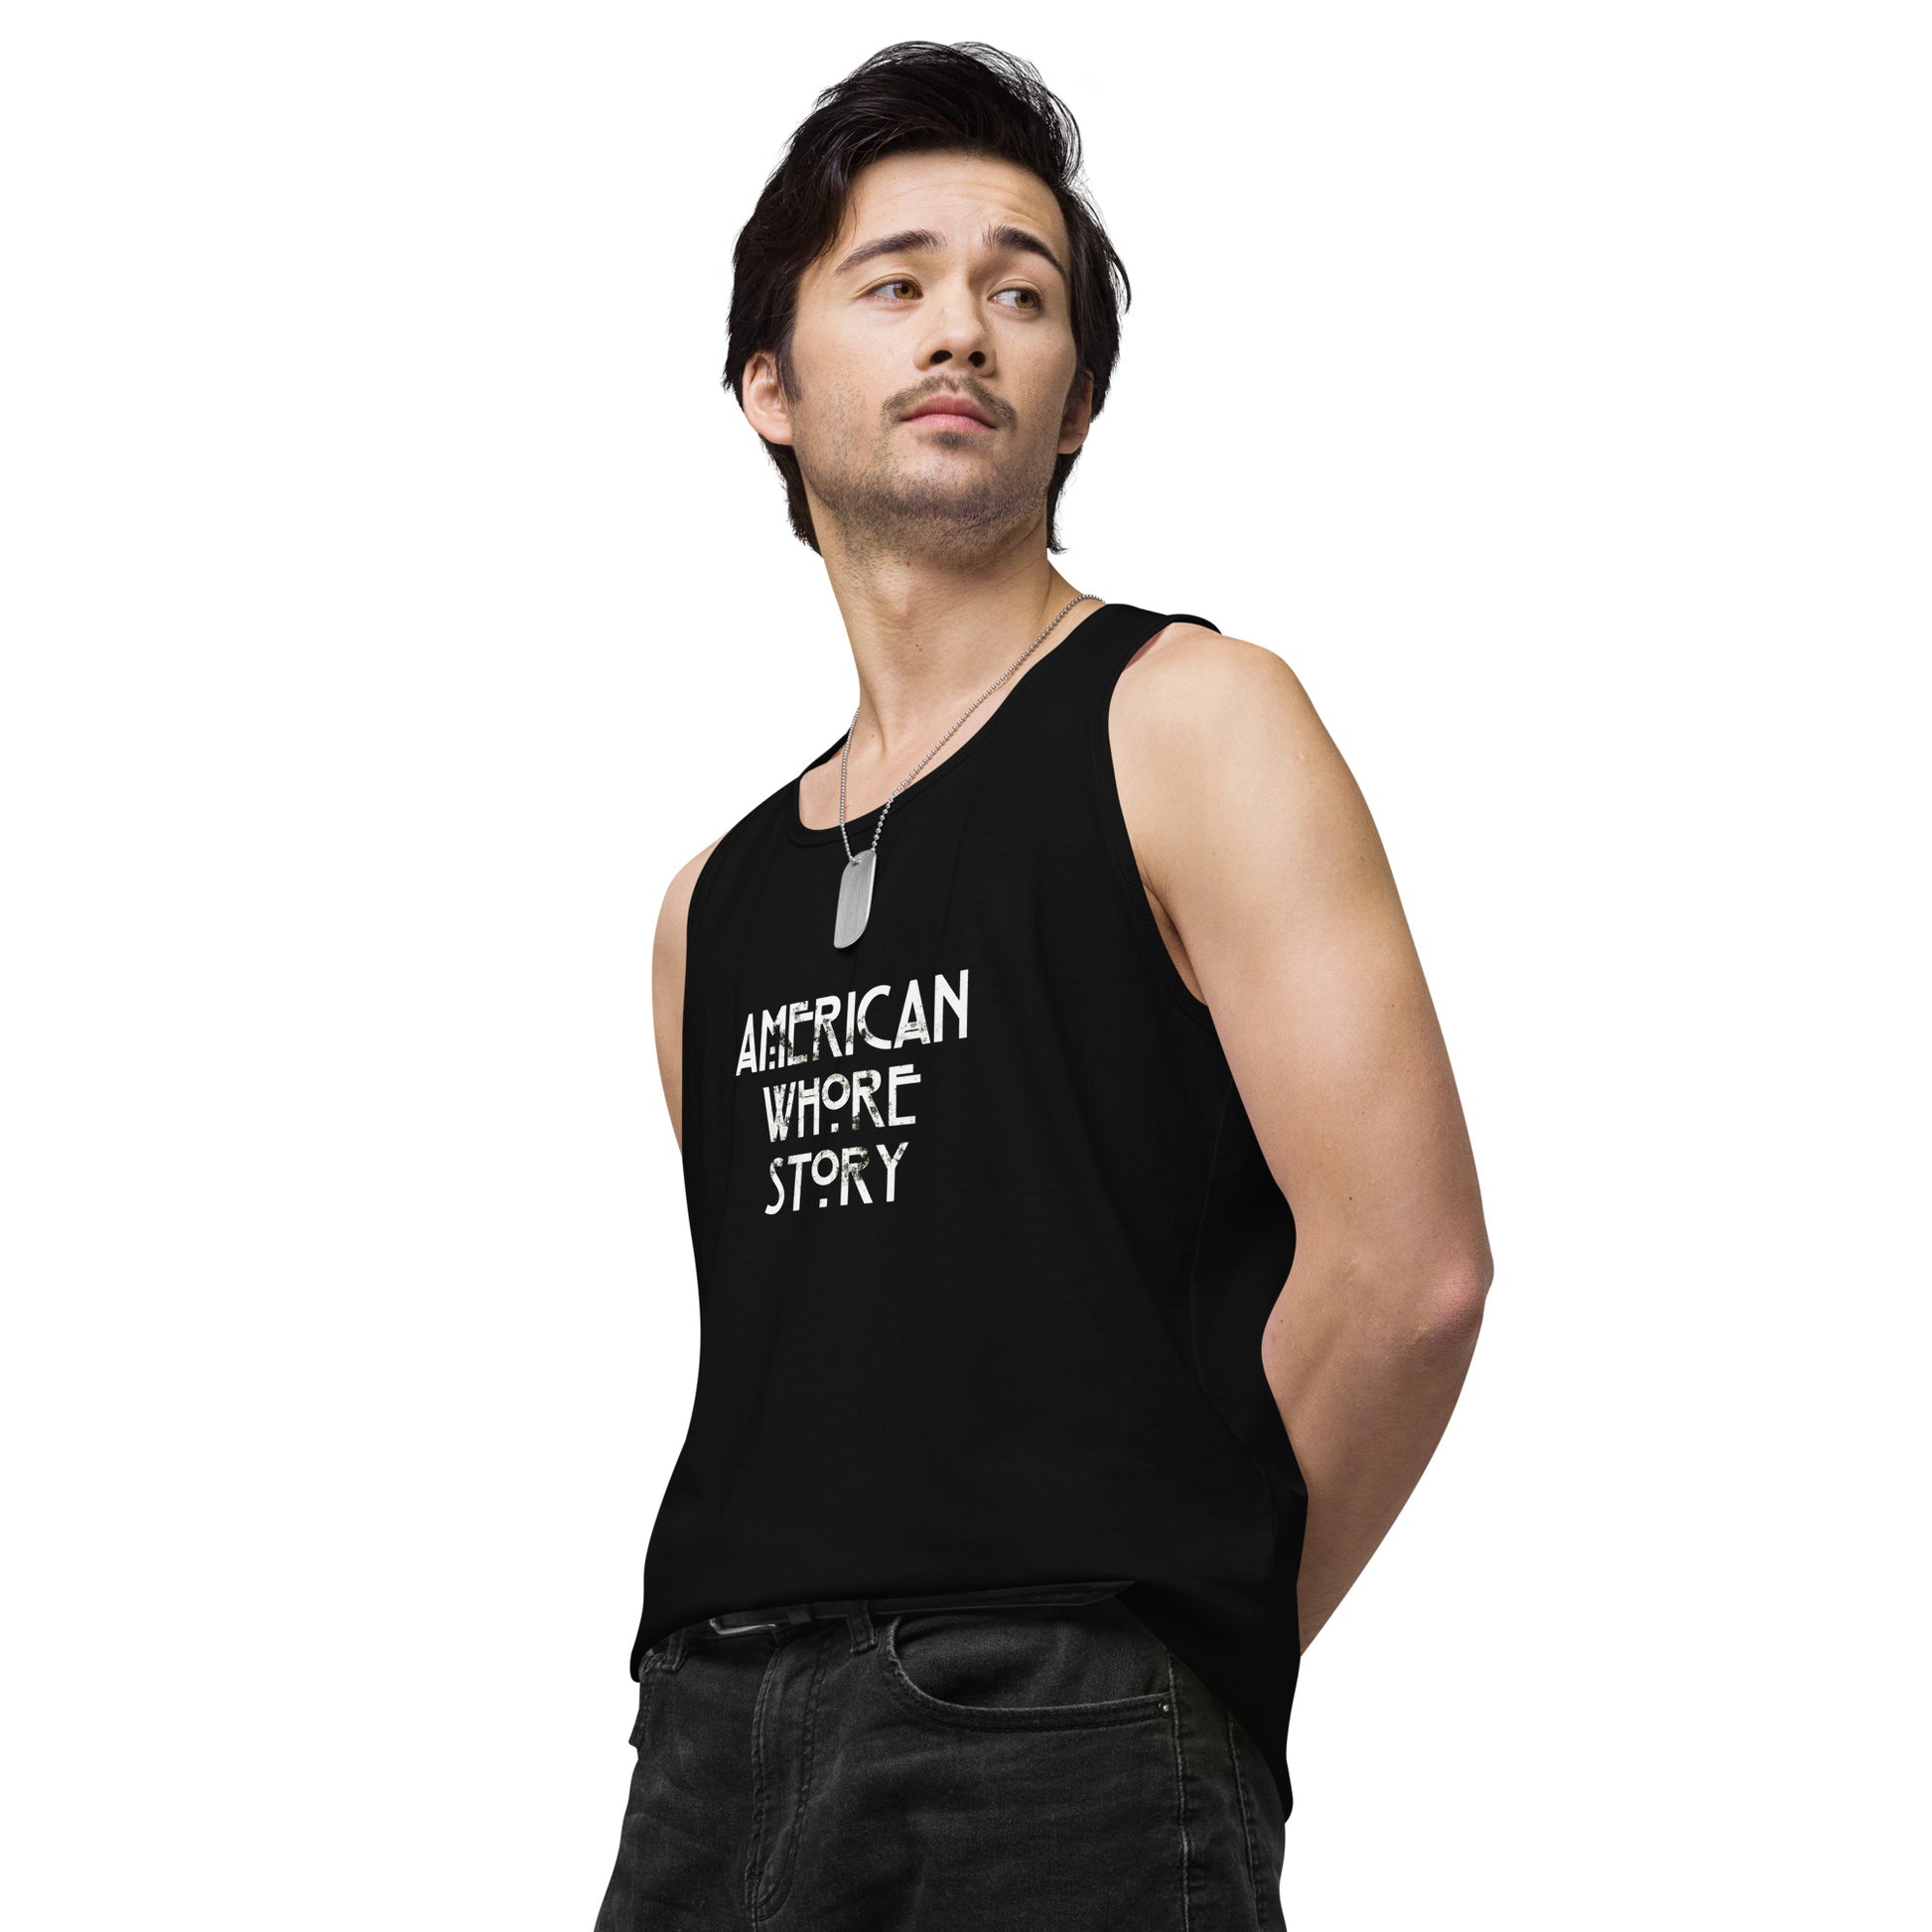 Unleash your sass with the 'American Whore Story' distressed white lettering unisex premium tank top by Moody Booty Apparel. This trendy LGBTQ-themed graphic shirt combines irreverence and humor. Show your pride with this bold and fashionable piece.